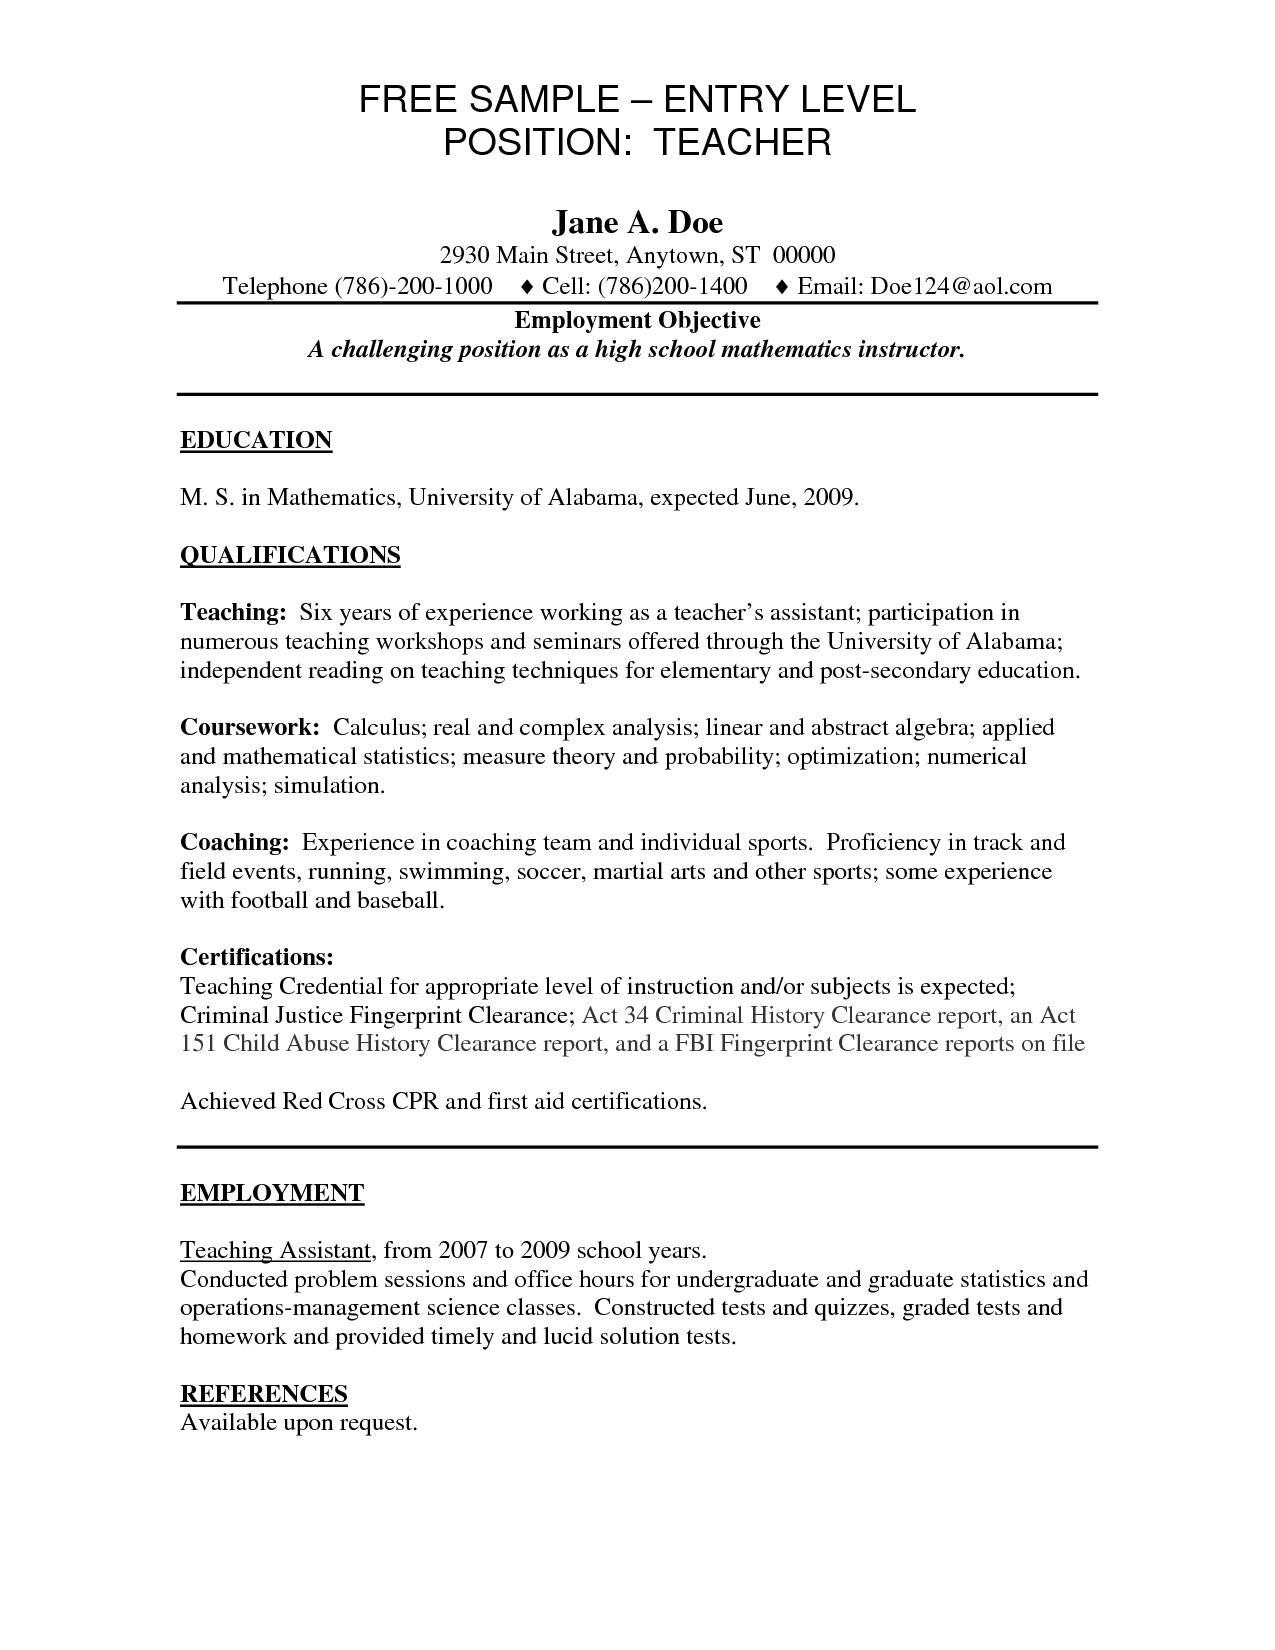 Sample Resumes for Entry Level Positions Entry Level It Job Resume Resume Ideas